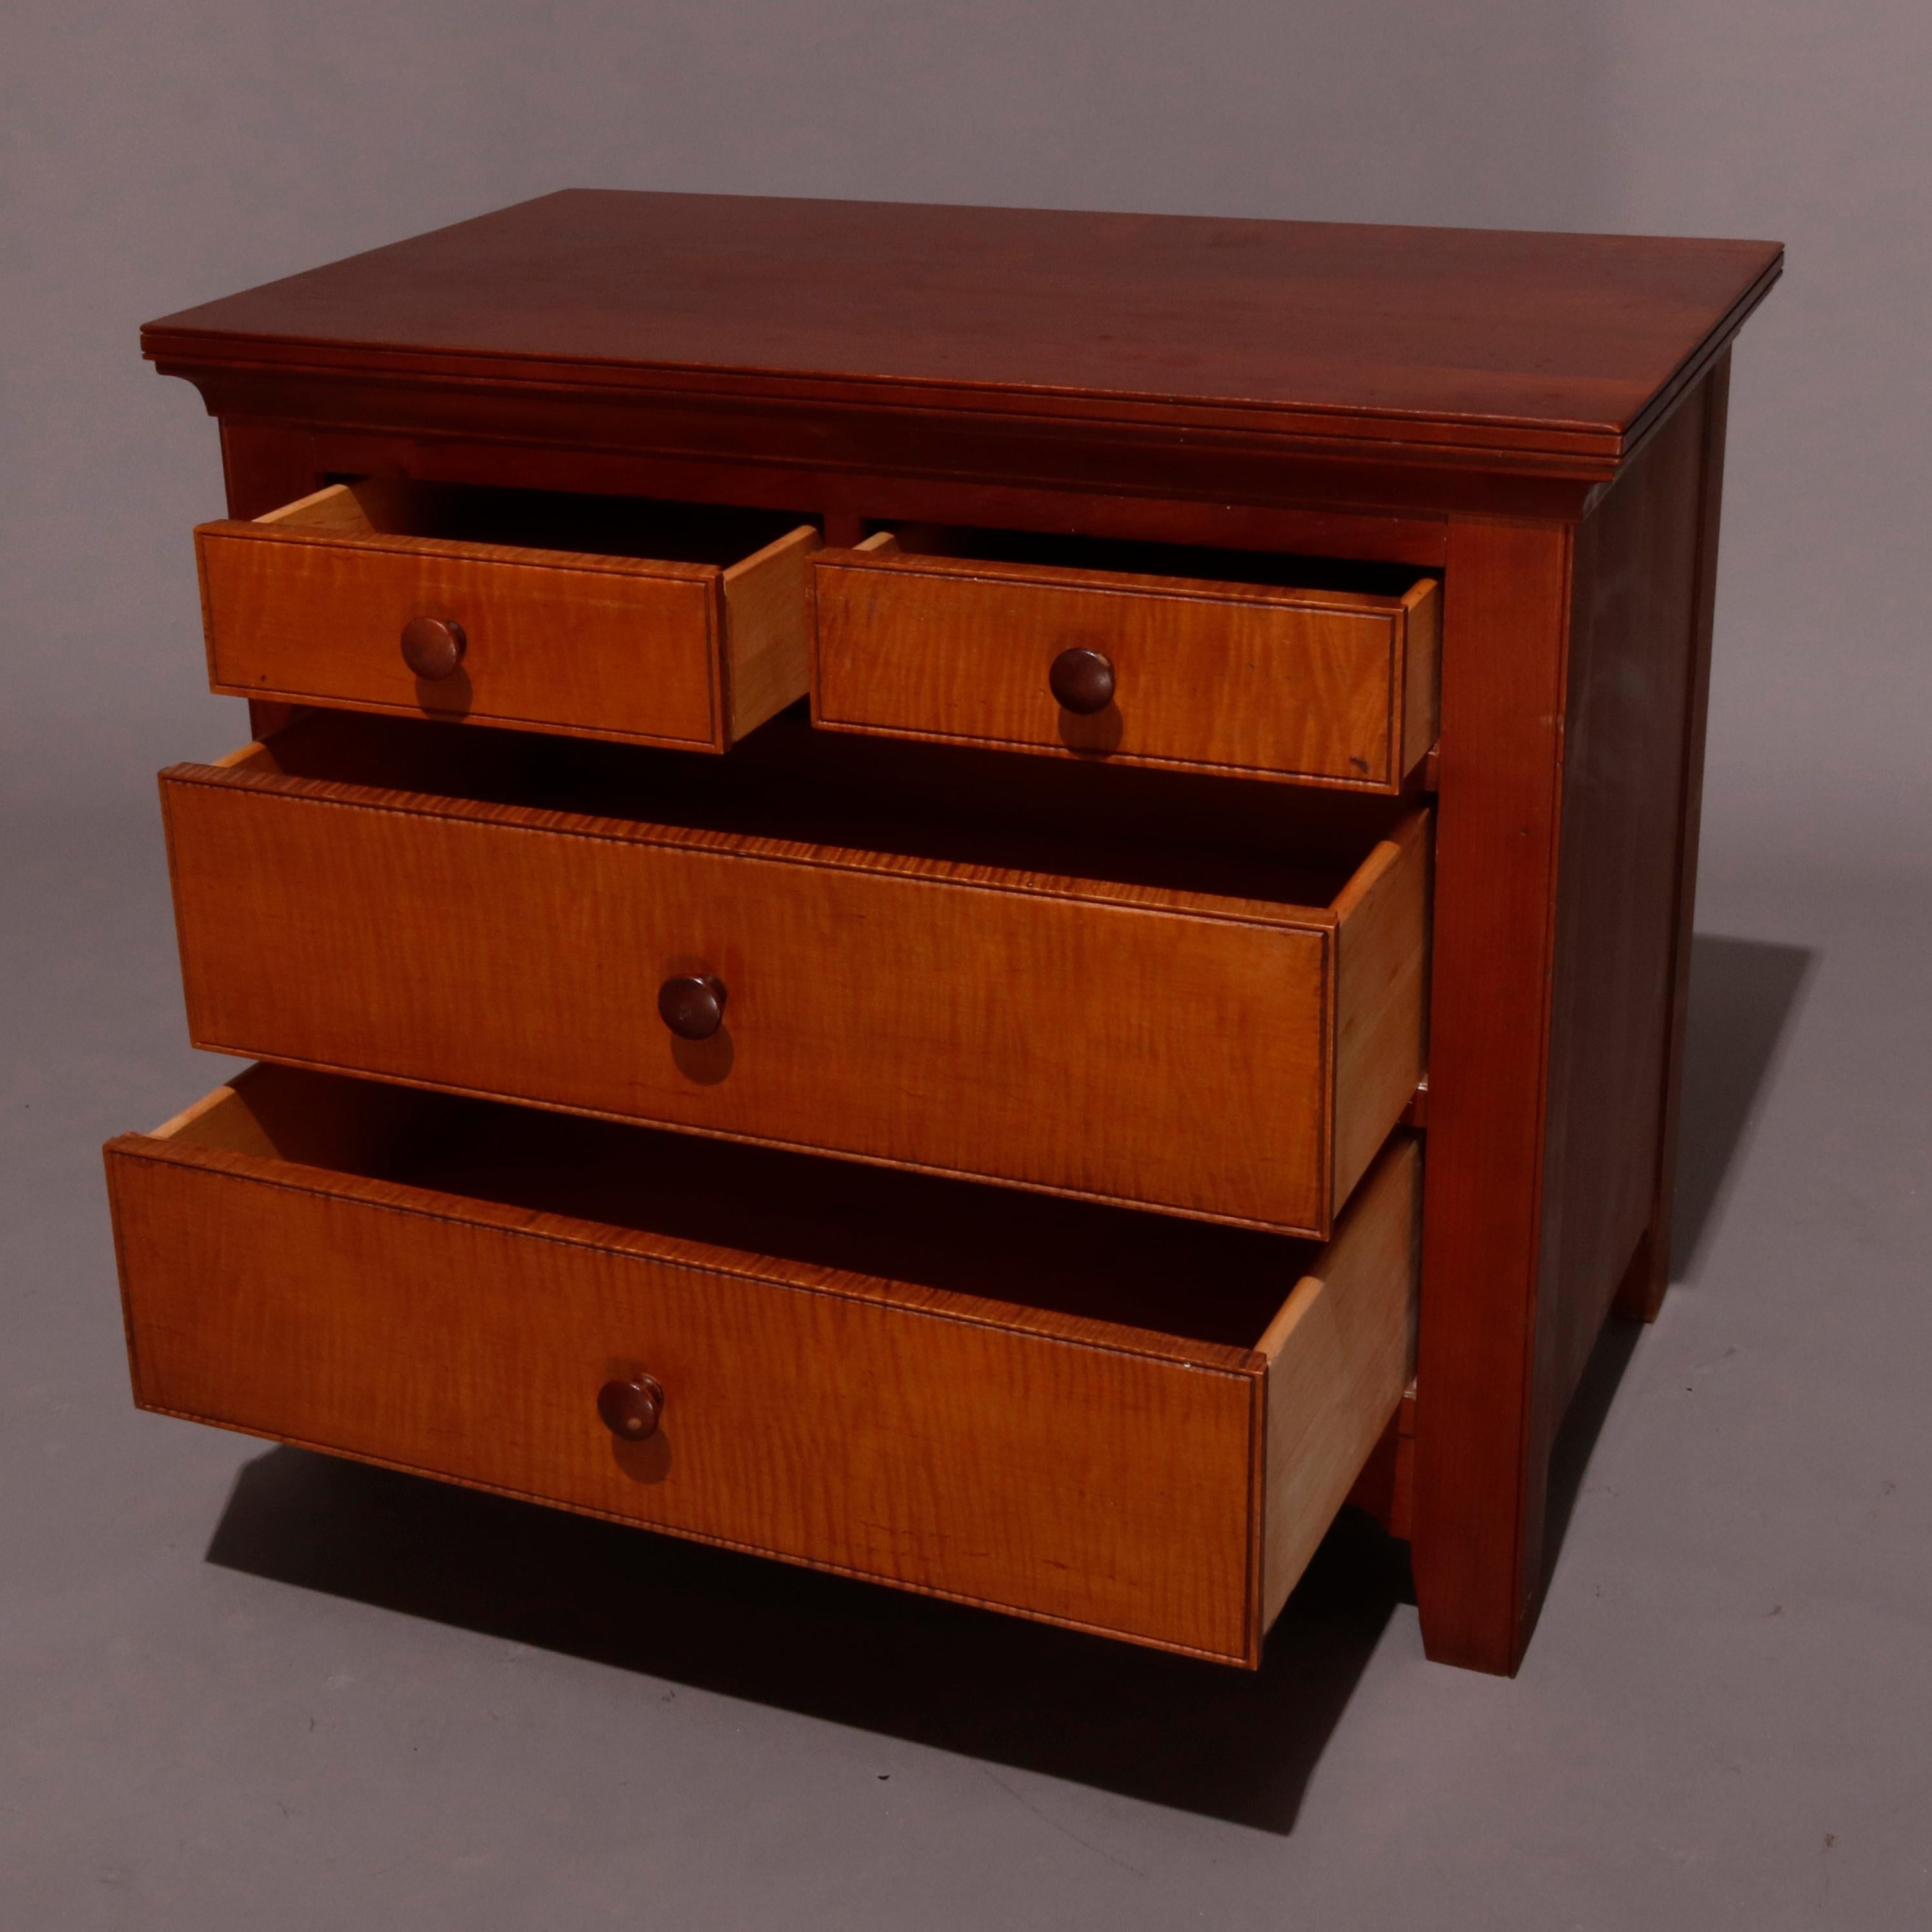 An Americana Shaker Style diminutive chest features cherry construction with two smaller over two long tiger maple front drawers, 20th century

Measures: 26